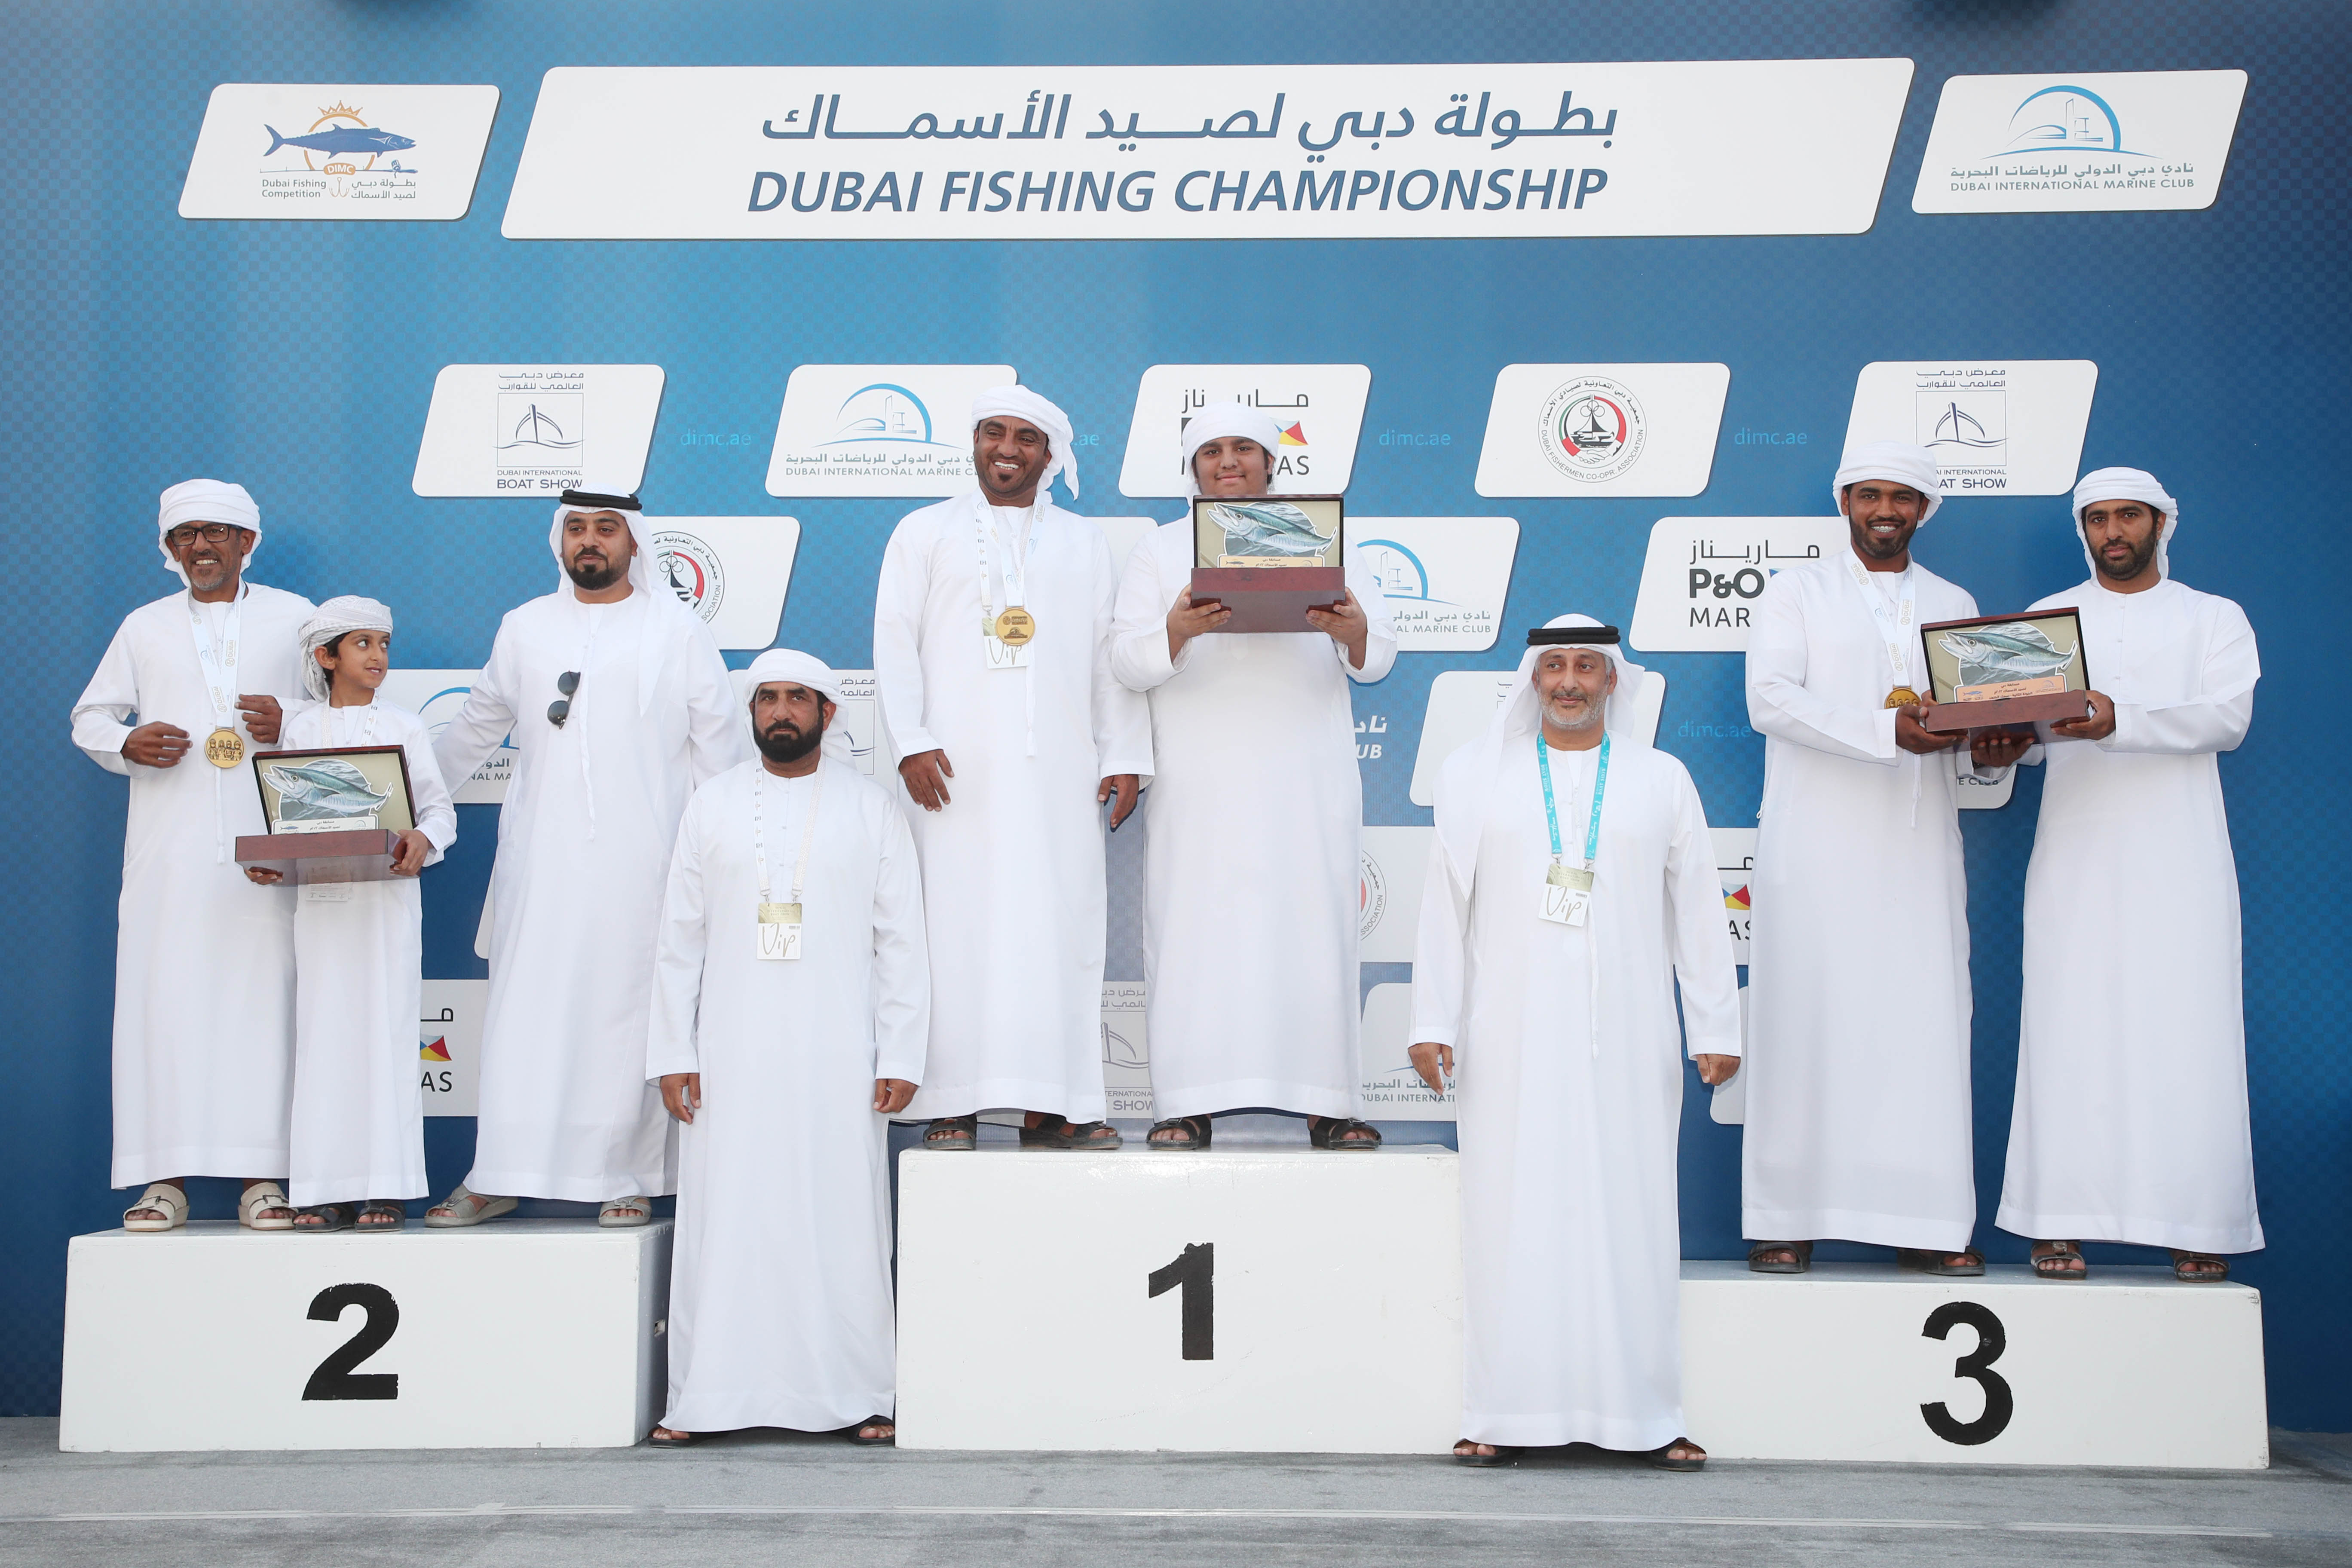 Al Mansoori leads the Kingfish Category with 25, 000 Prize Money